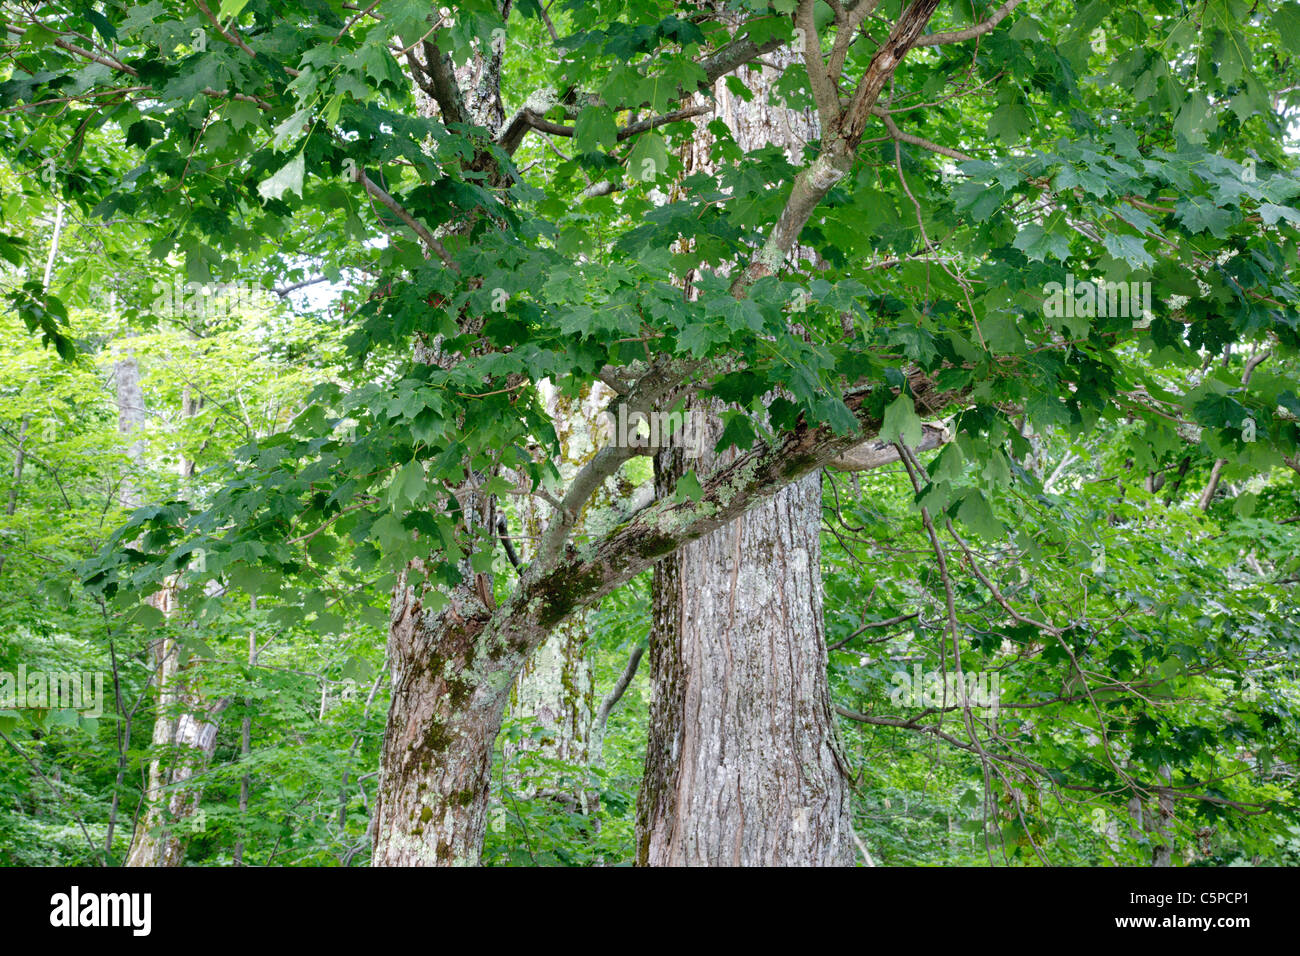 Sugar maple trees in a Semi-rich mesic sugar maple forest during the summer months in Franconia, New Hampshire Stock Photo